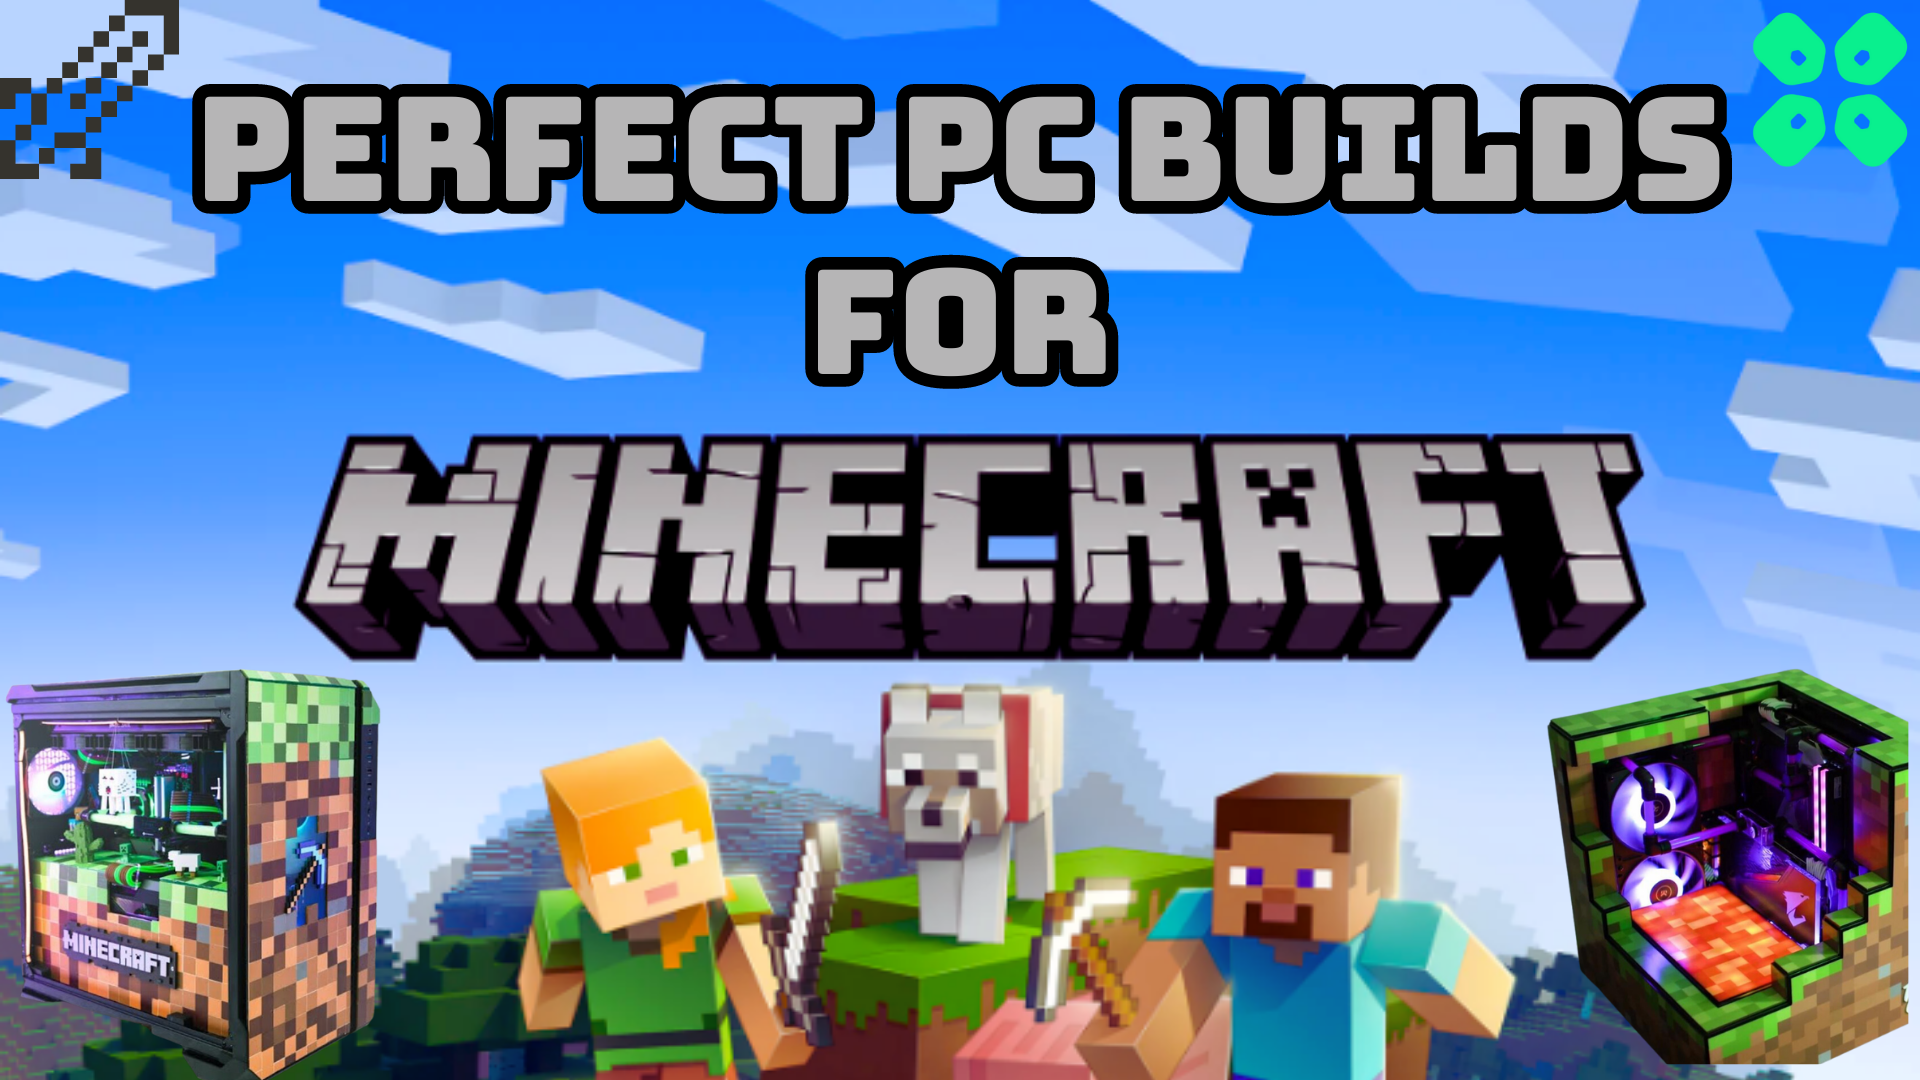 Perfect PC Build for Minecraft under budget